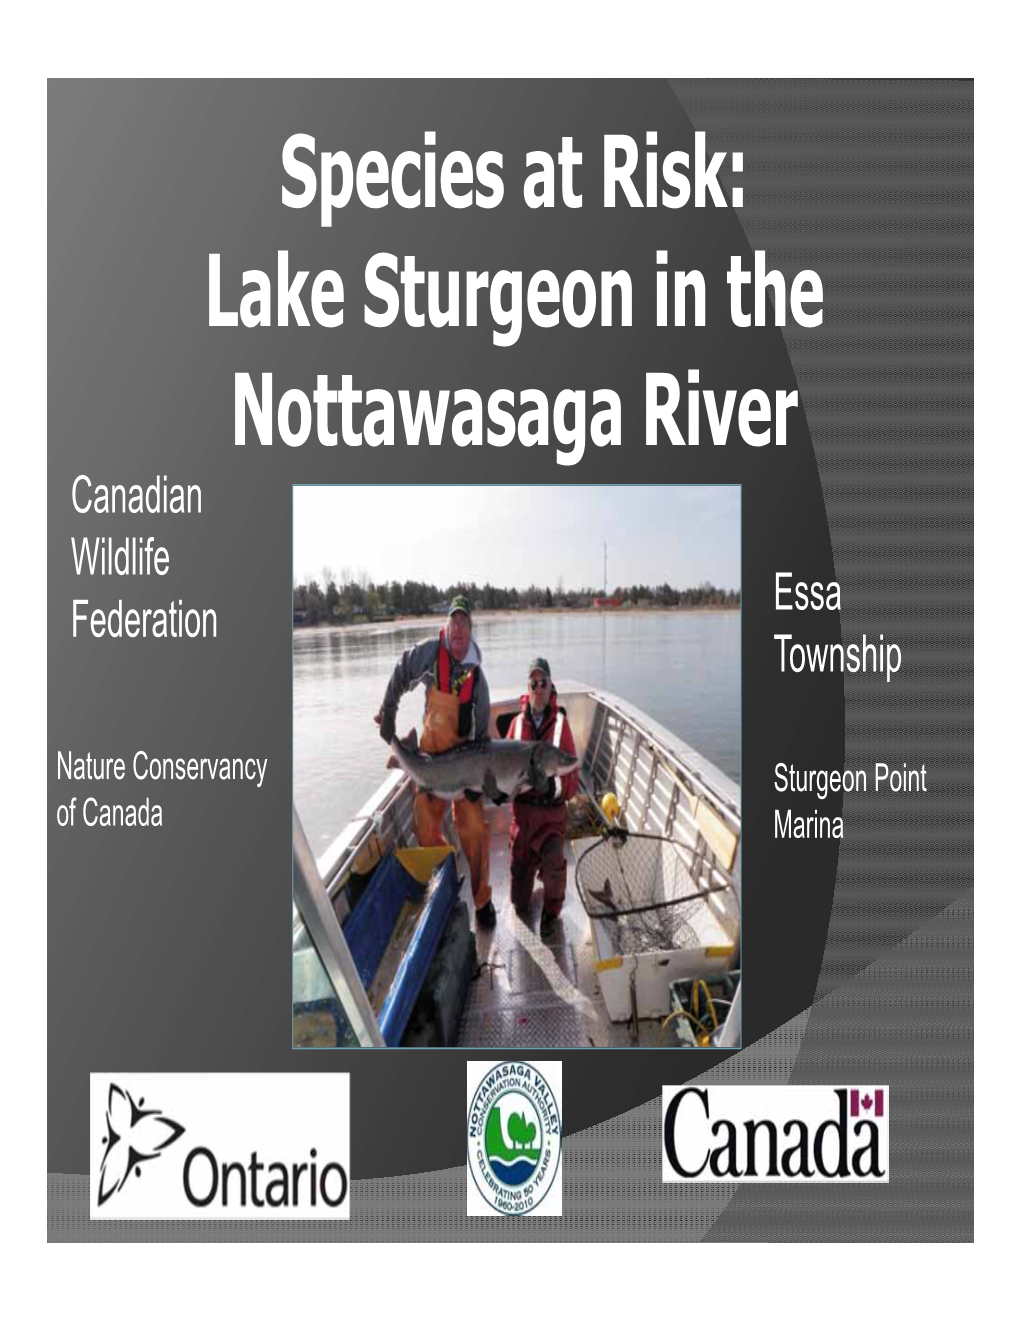 Species at Risk: Lake Sturgeon in the Nottawasaga River Canadian Wildlife Essa Federation Township